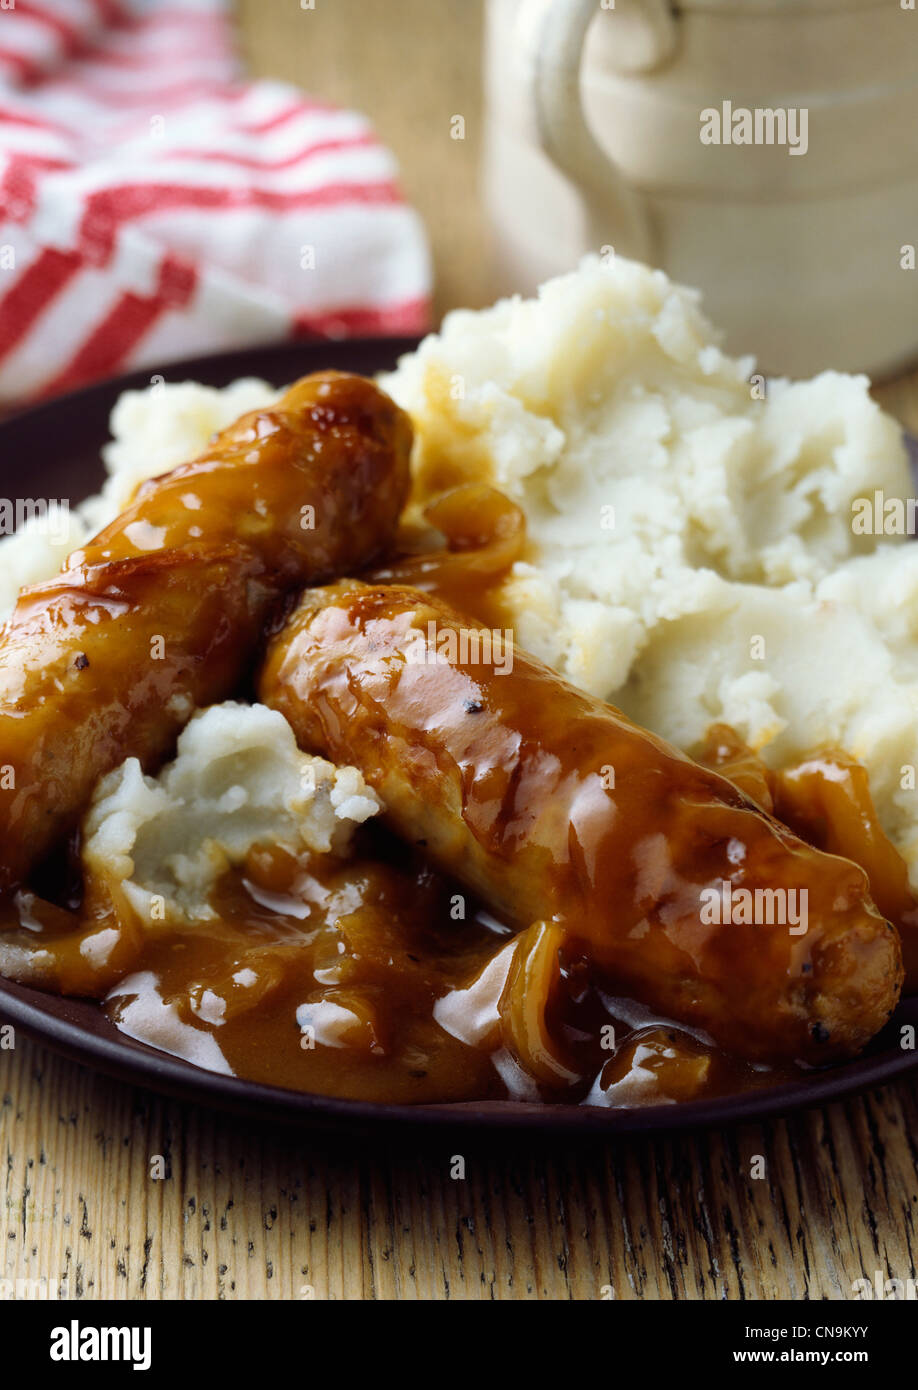 Sausage and potatoes with gravy Stock Photo